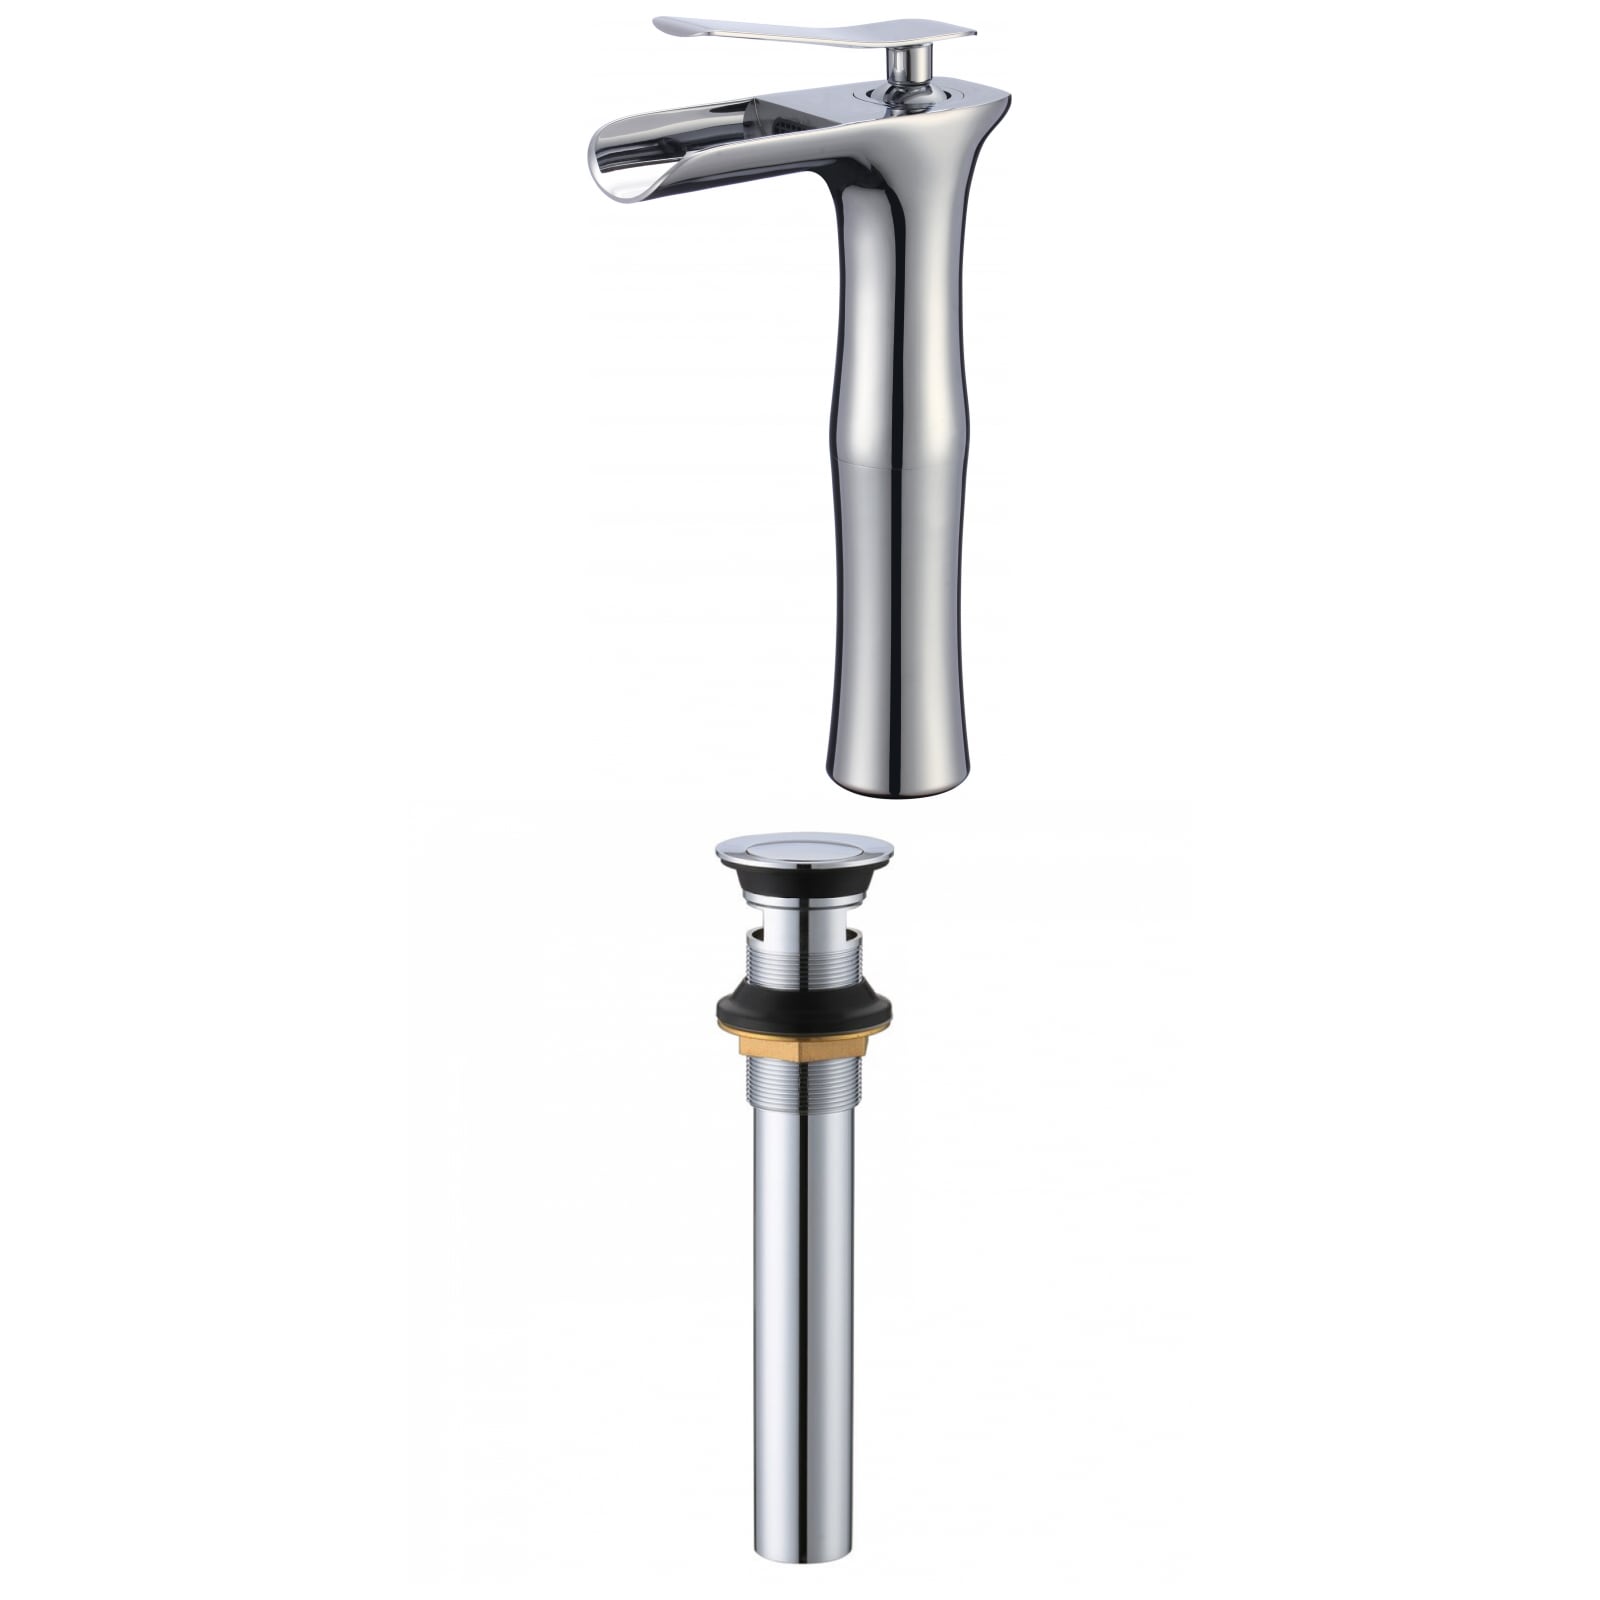 Rozin Bathroom Chrome Tap Single Spout Sink High Tap Deck Mounted One Handle Basin Mixer Tap